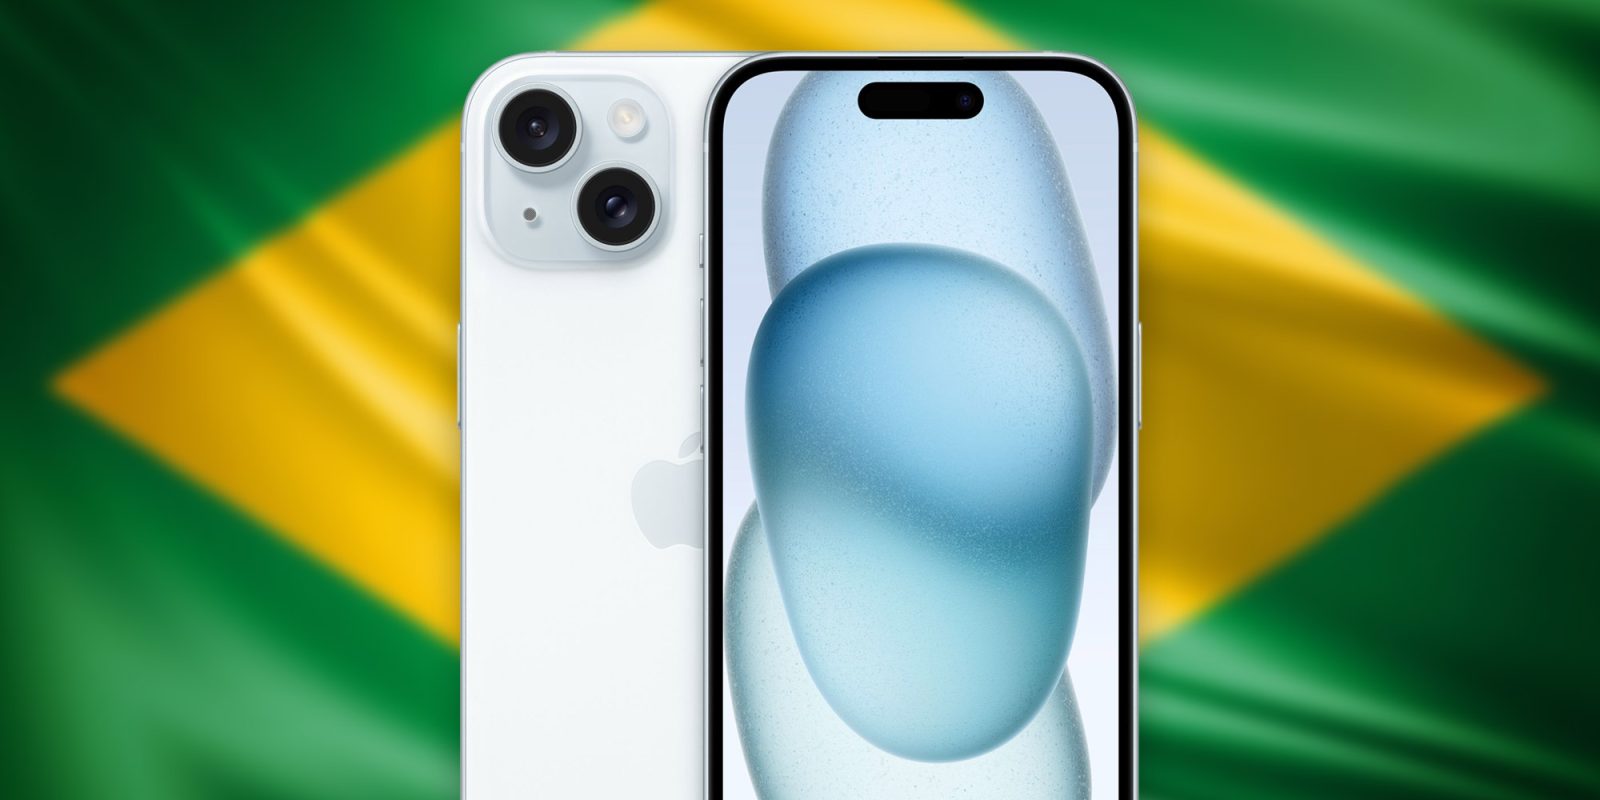 Apple is now assembling the 6.1-inch iPhone 15 in Brazil